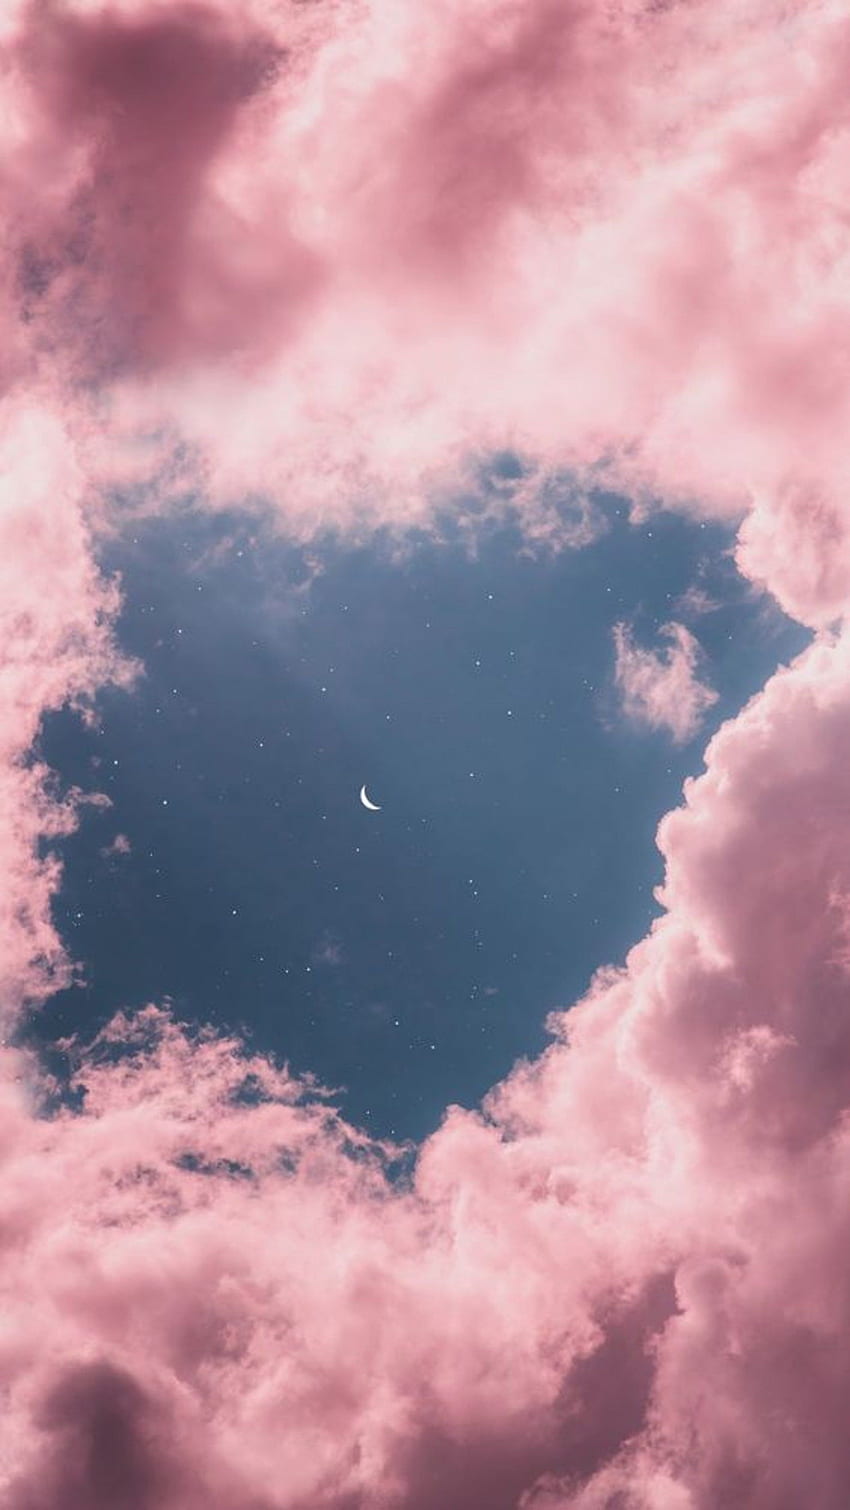 Sky, Cloud, Pink, Daytime, Blue, Red in 2020. Unique iphone , Pink clouds , Aesthetic iphone HD phone wallpaper